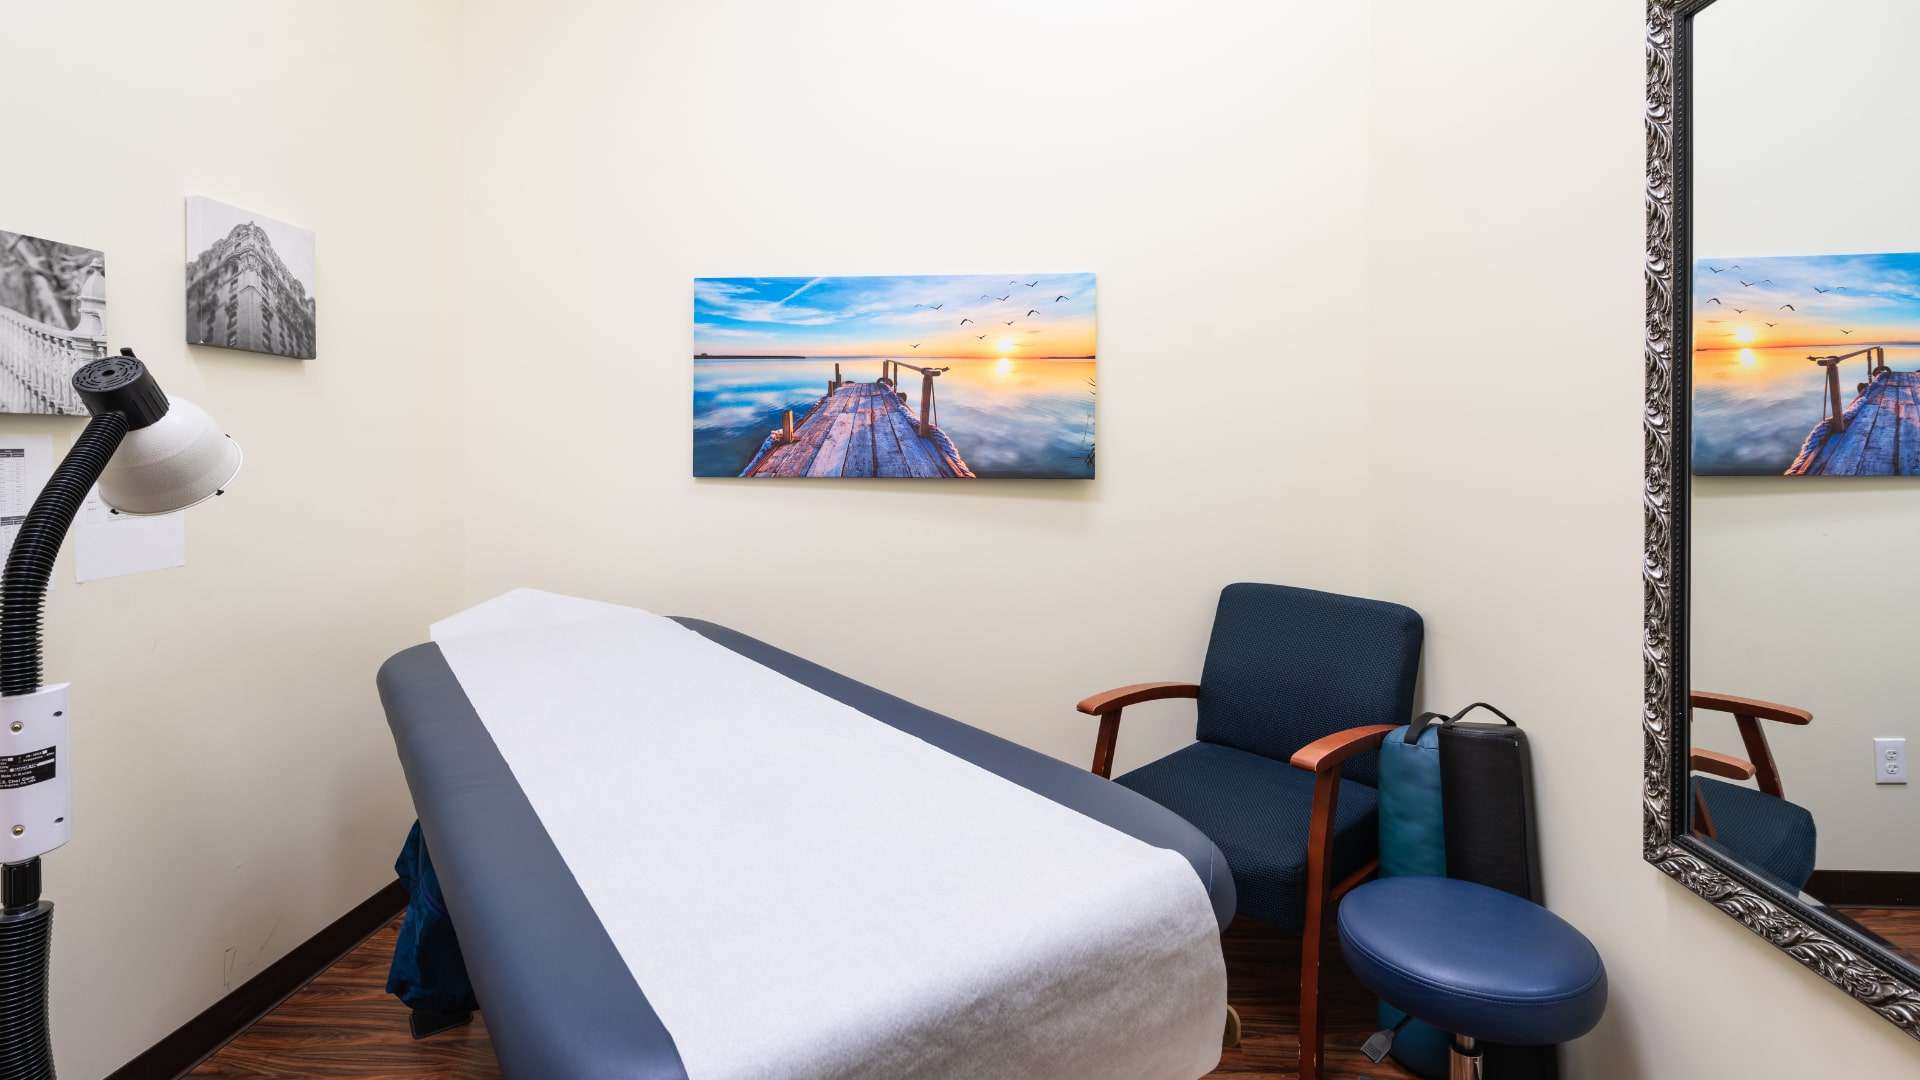 Patient exam room for acupuncture treatment | NorthEast Spine & Sports Medicine